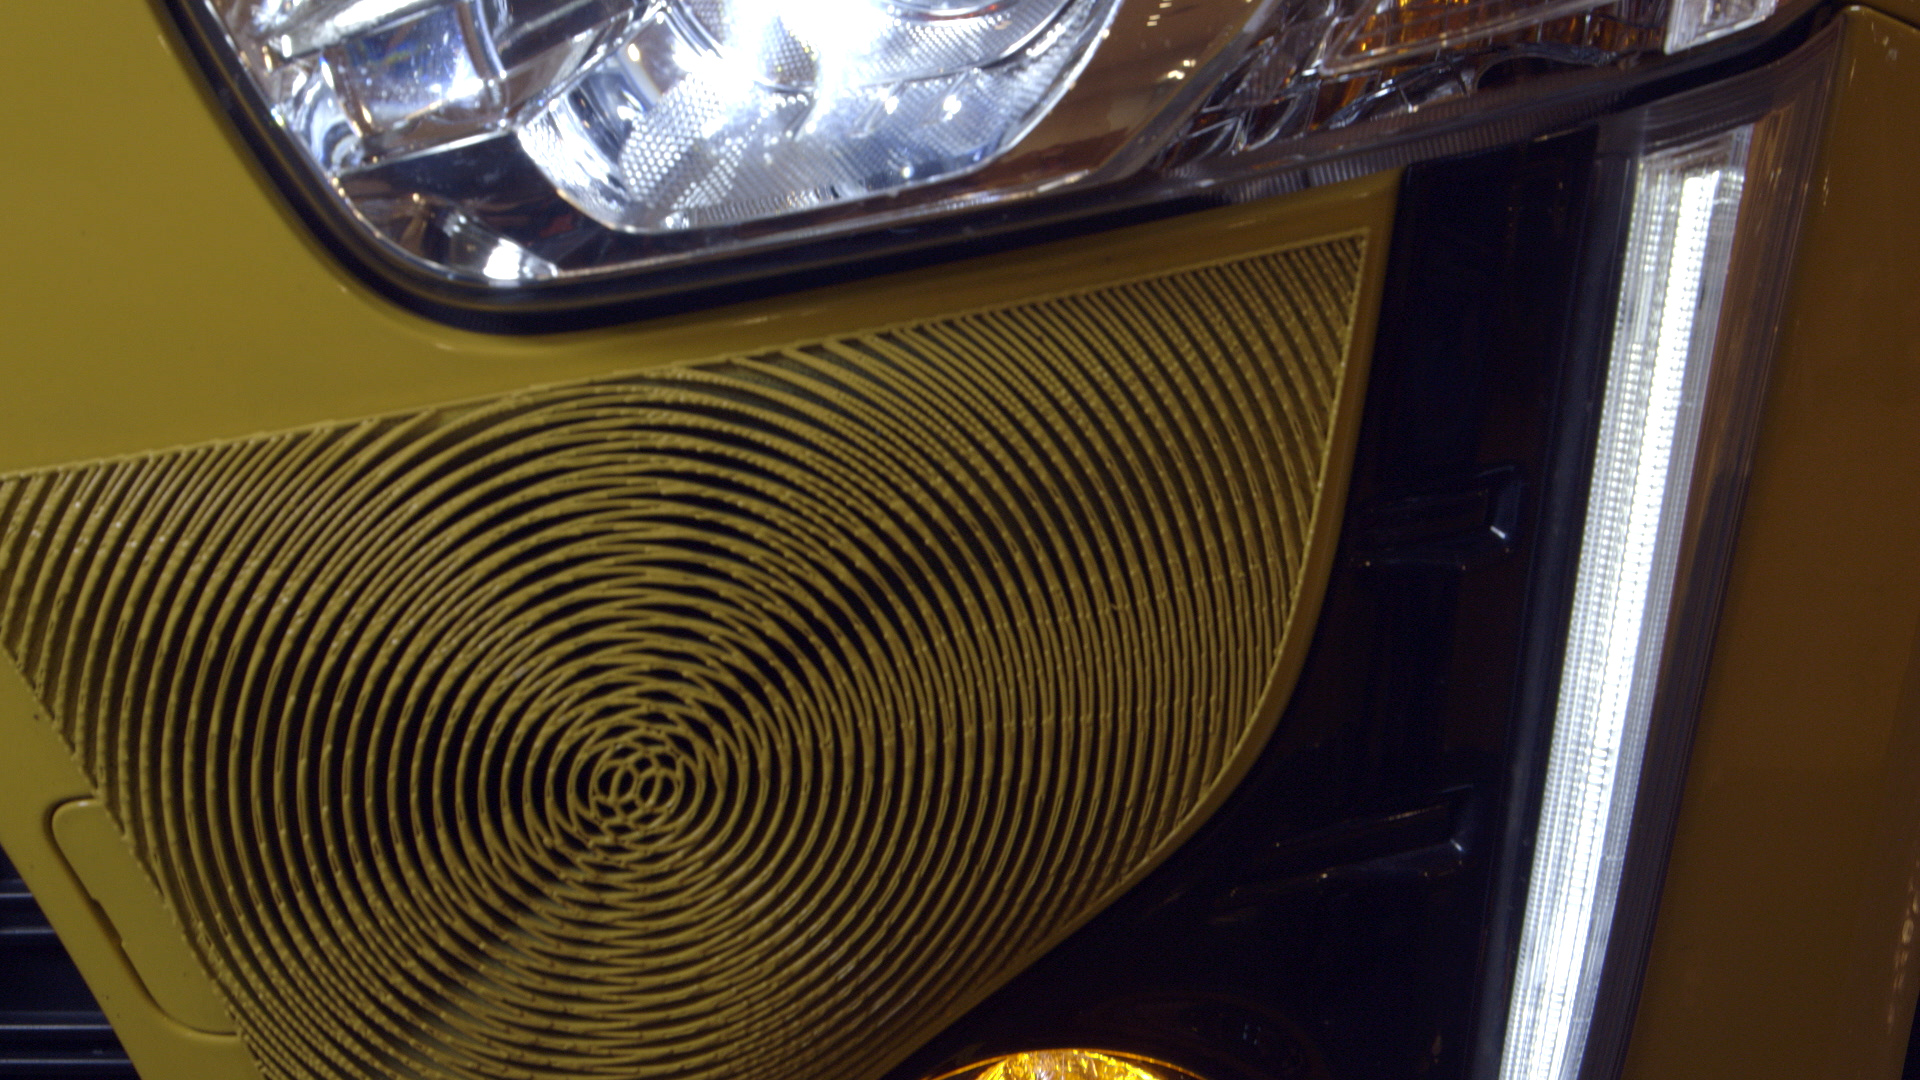  Daihatsu has productionized custom 3D printed panels for their Copen vehicle 